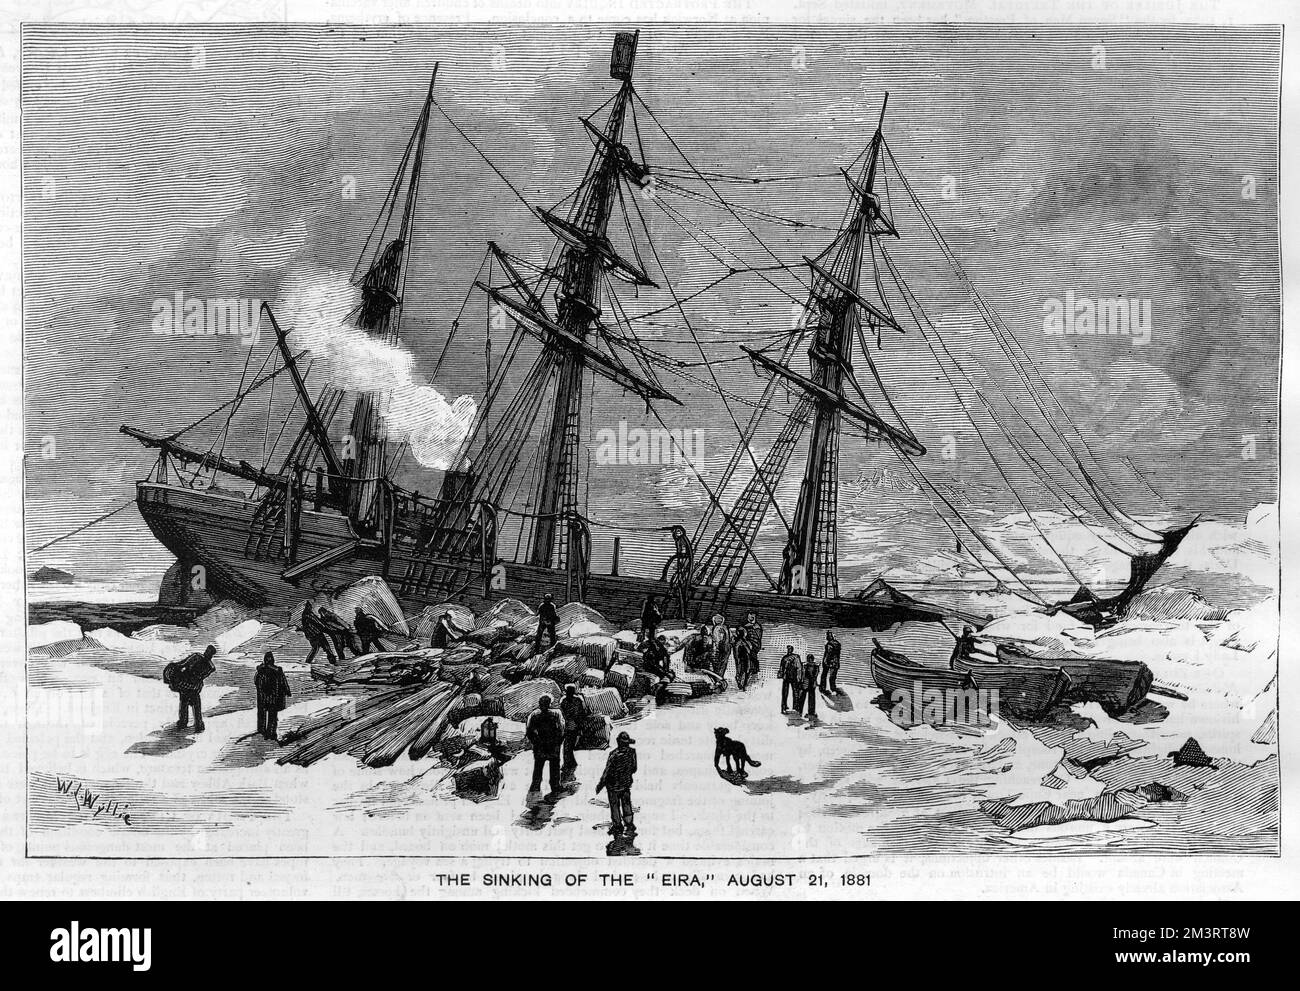 Engraving by W.L. Wyllie, featuring Benjamin Leigh Smith's fifth Arctic voyage 1881-82. Between 1871 and 1882, Leigh Smith undertook five major scientific expeditions to Svalbard and Franz Josef Land. In 1881, he and his crew survived for 10 months in Russian Franz Josef Land after their ship was crushed in the ice at Cape Flora, Northbrook Island. This plate shows the sinking on the 'Eira' on 21st August 1881.     Date: 1882 Stock Photo